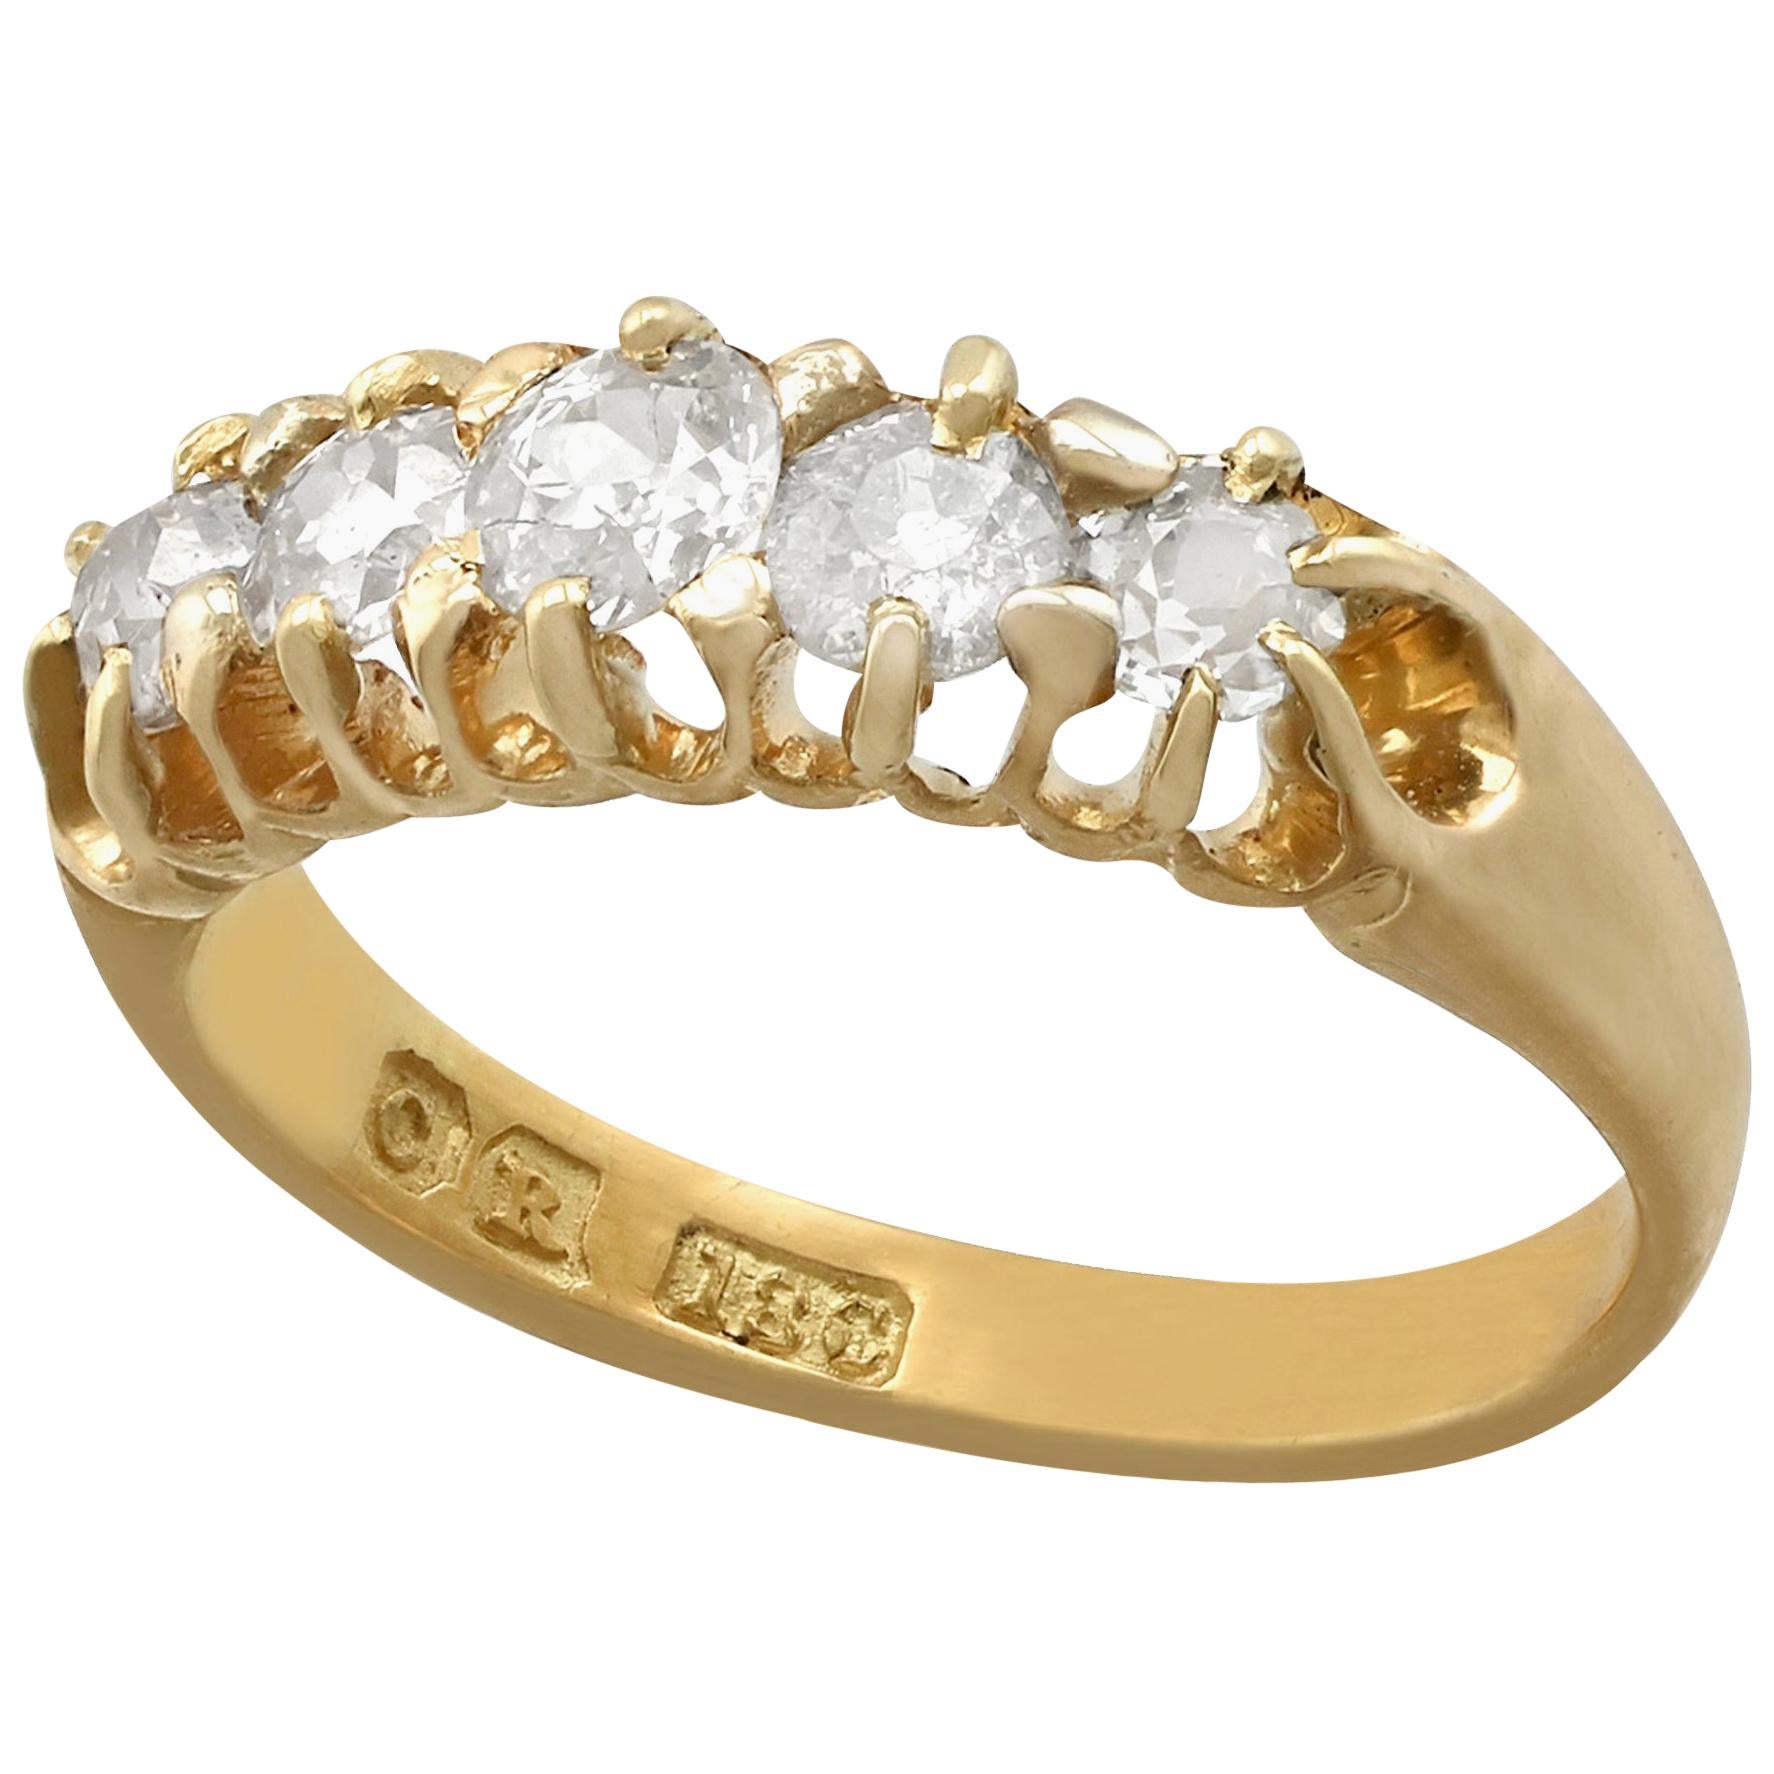 Antique Five Stone Diamond Ring in Yellow Gold